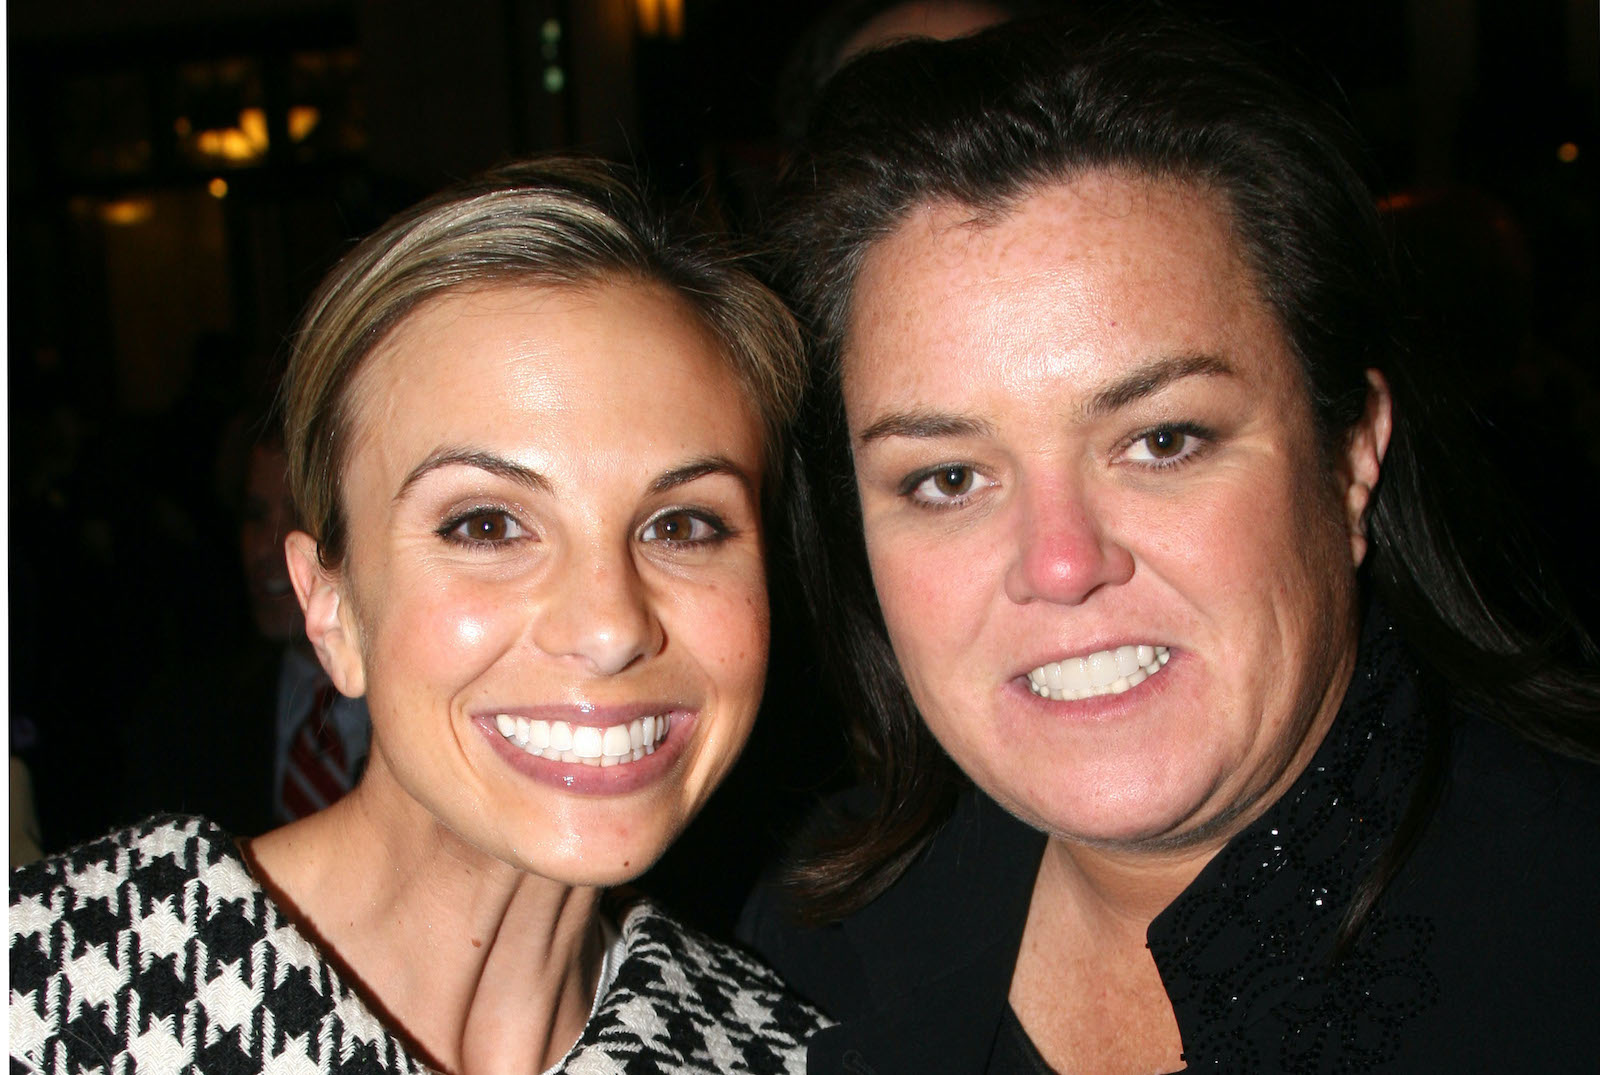 Elisabeth Hasselbeck and Rosie O'Donnell from 'The View' smile for a photo